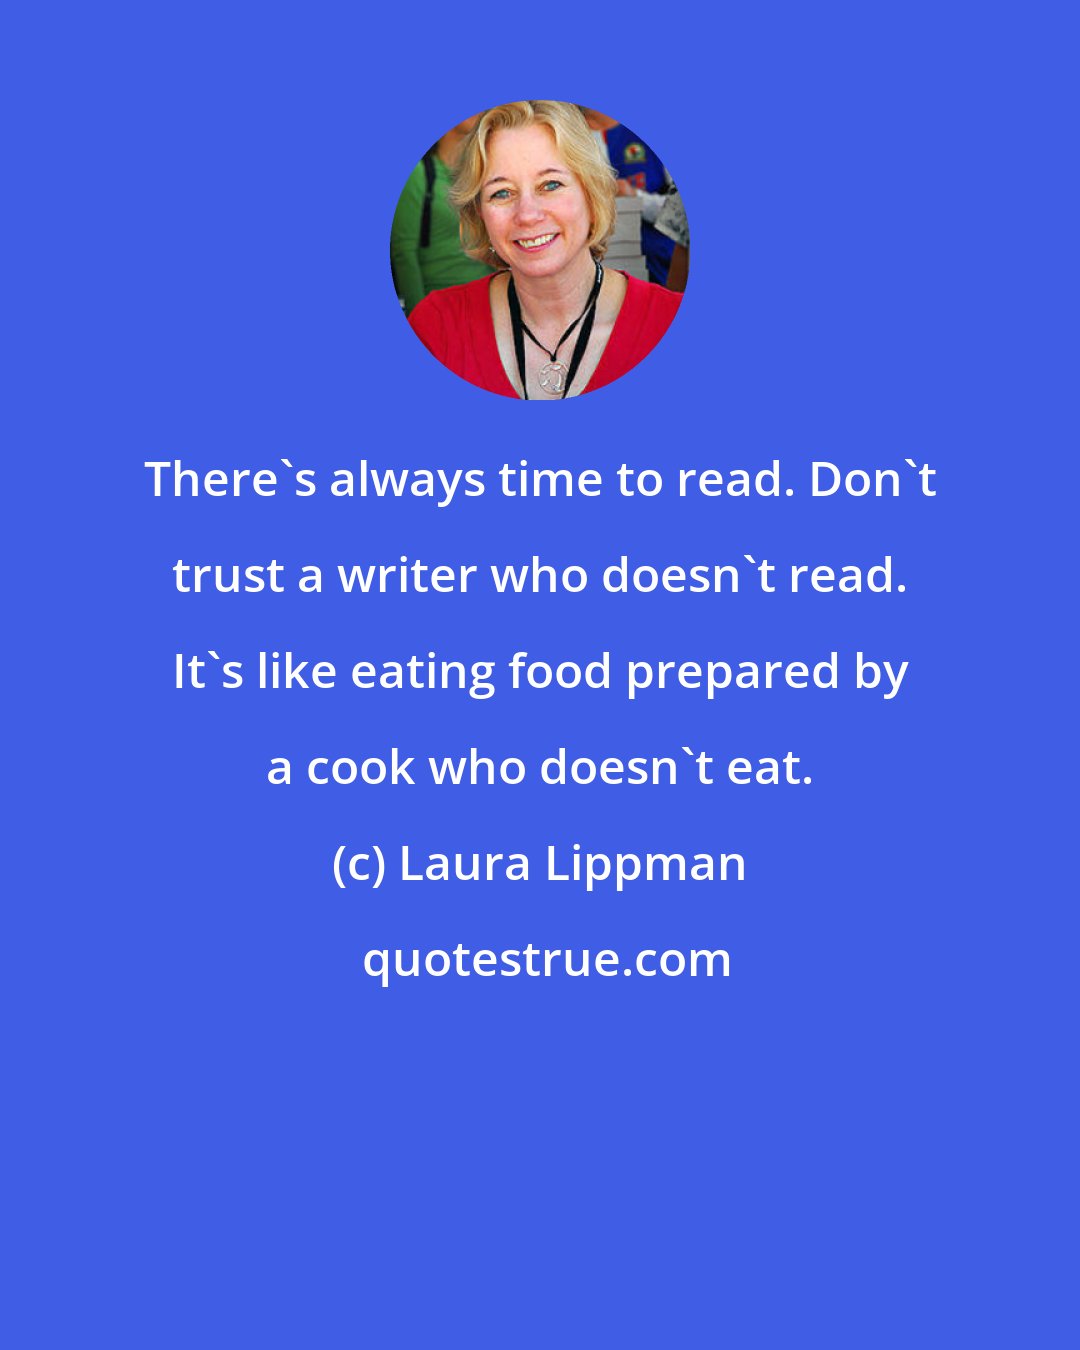 Laura Lippman: There's always time to read. Don't trust a writer who doesn't read. It's like eating food prepared by a cook who doesn't eat.